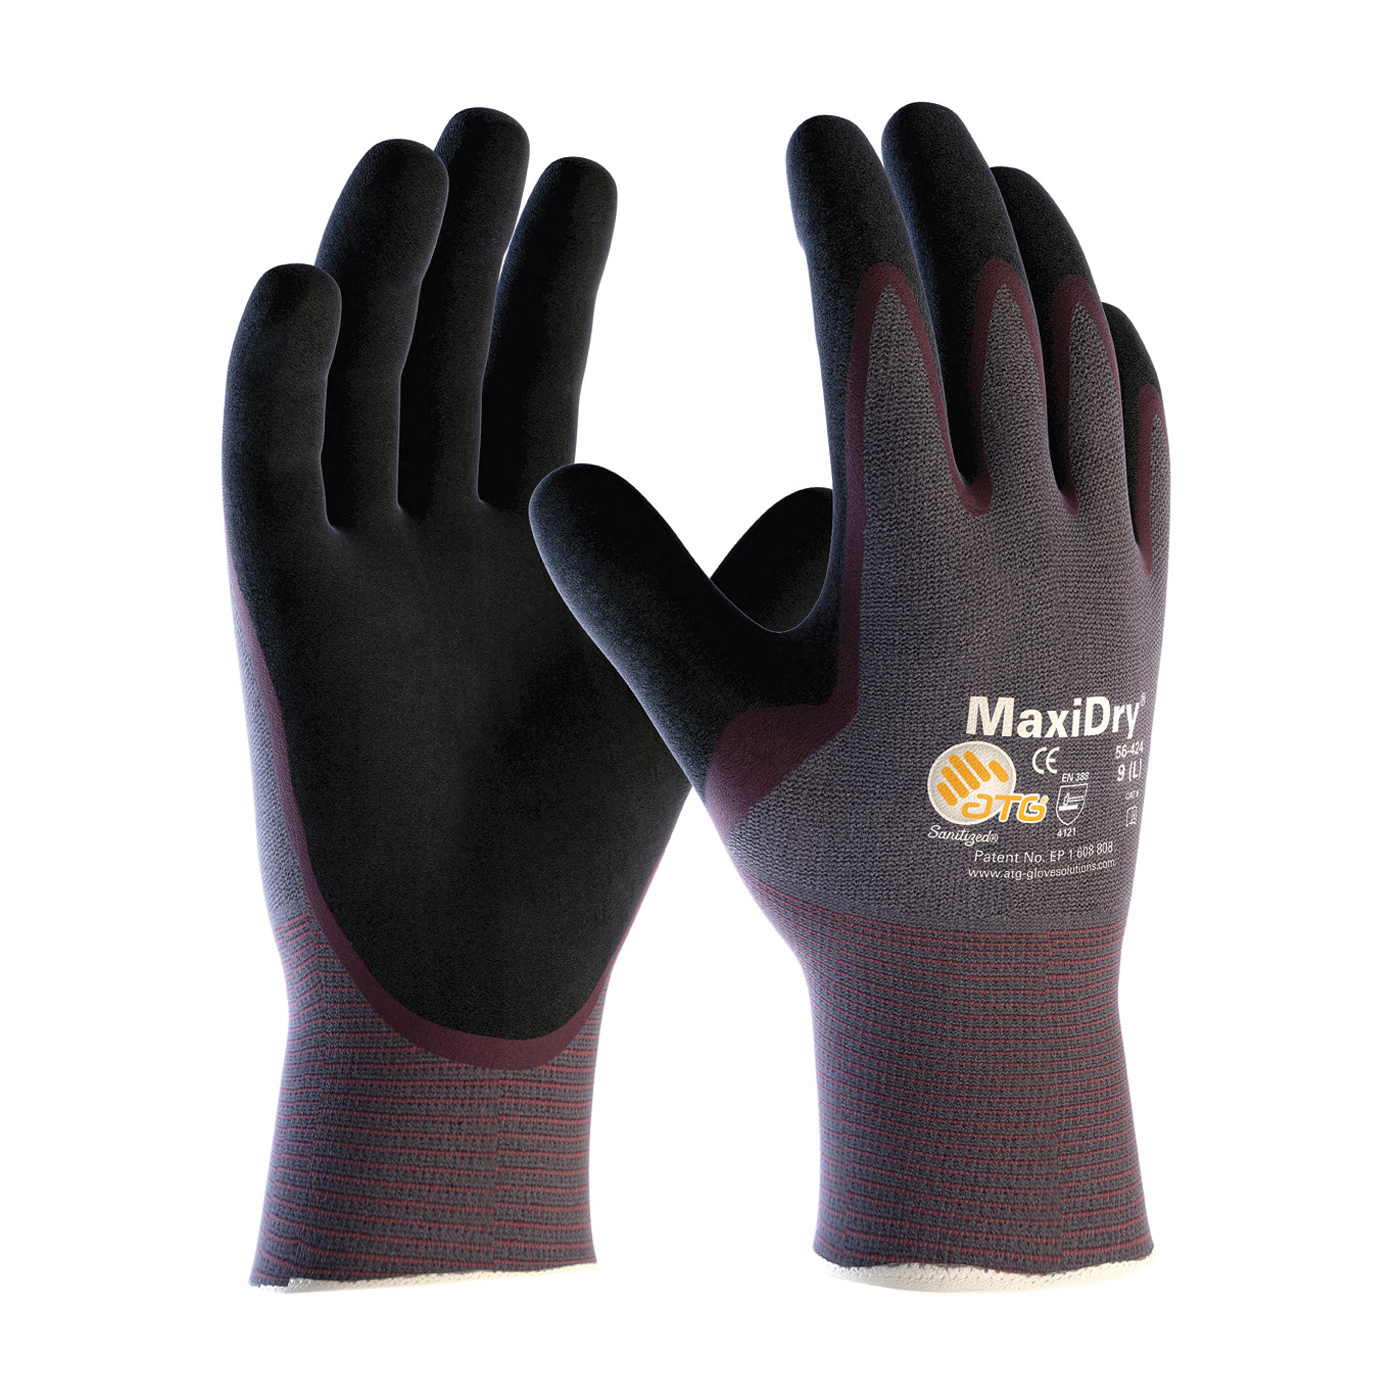 ATG® MaxiDry® 56-424/XS High Performance General Purpose Gloves, Coated, XS, Nylon Palm, Nylon, Black/Purple, Continuous Knit Wrist Cuff, Nitrile Coating, Resists: Abrasion, Cut, Puncture and Tear, Nylon Lining, Seamless Knit